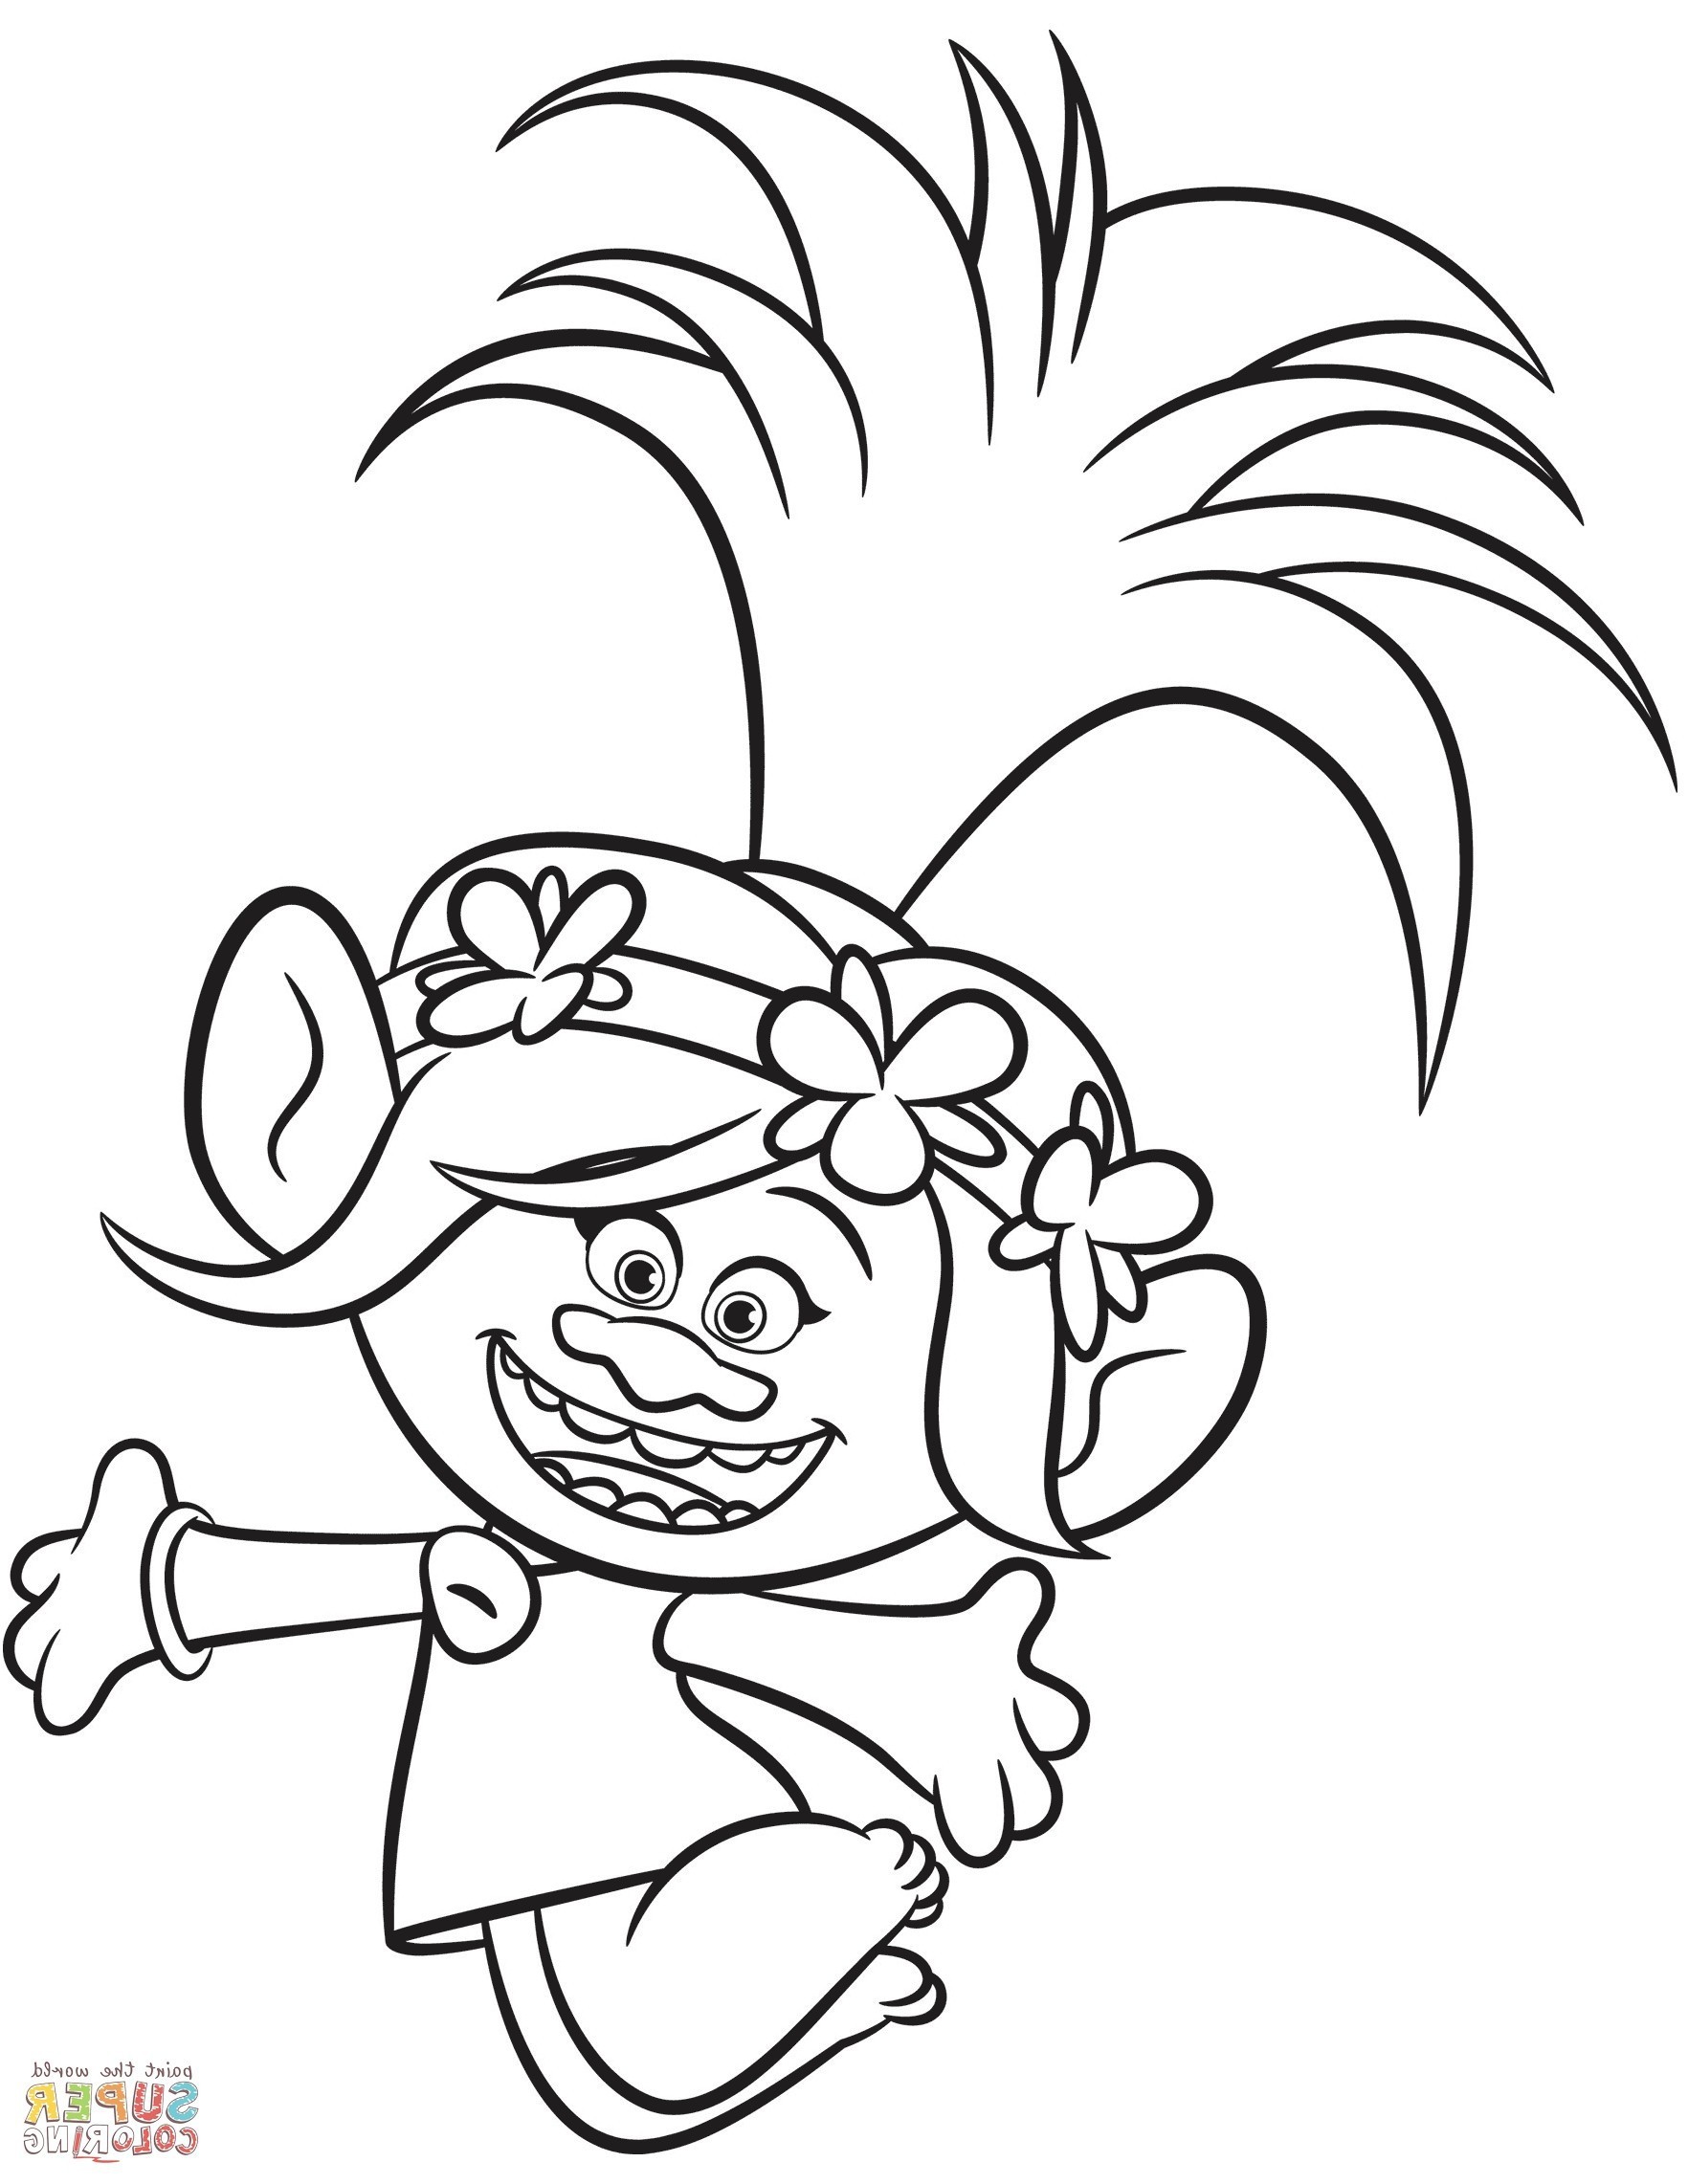 Poppy Troll Coloring Page Wallpaper